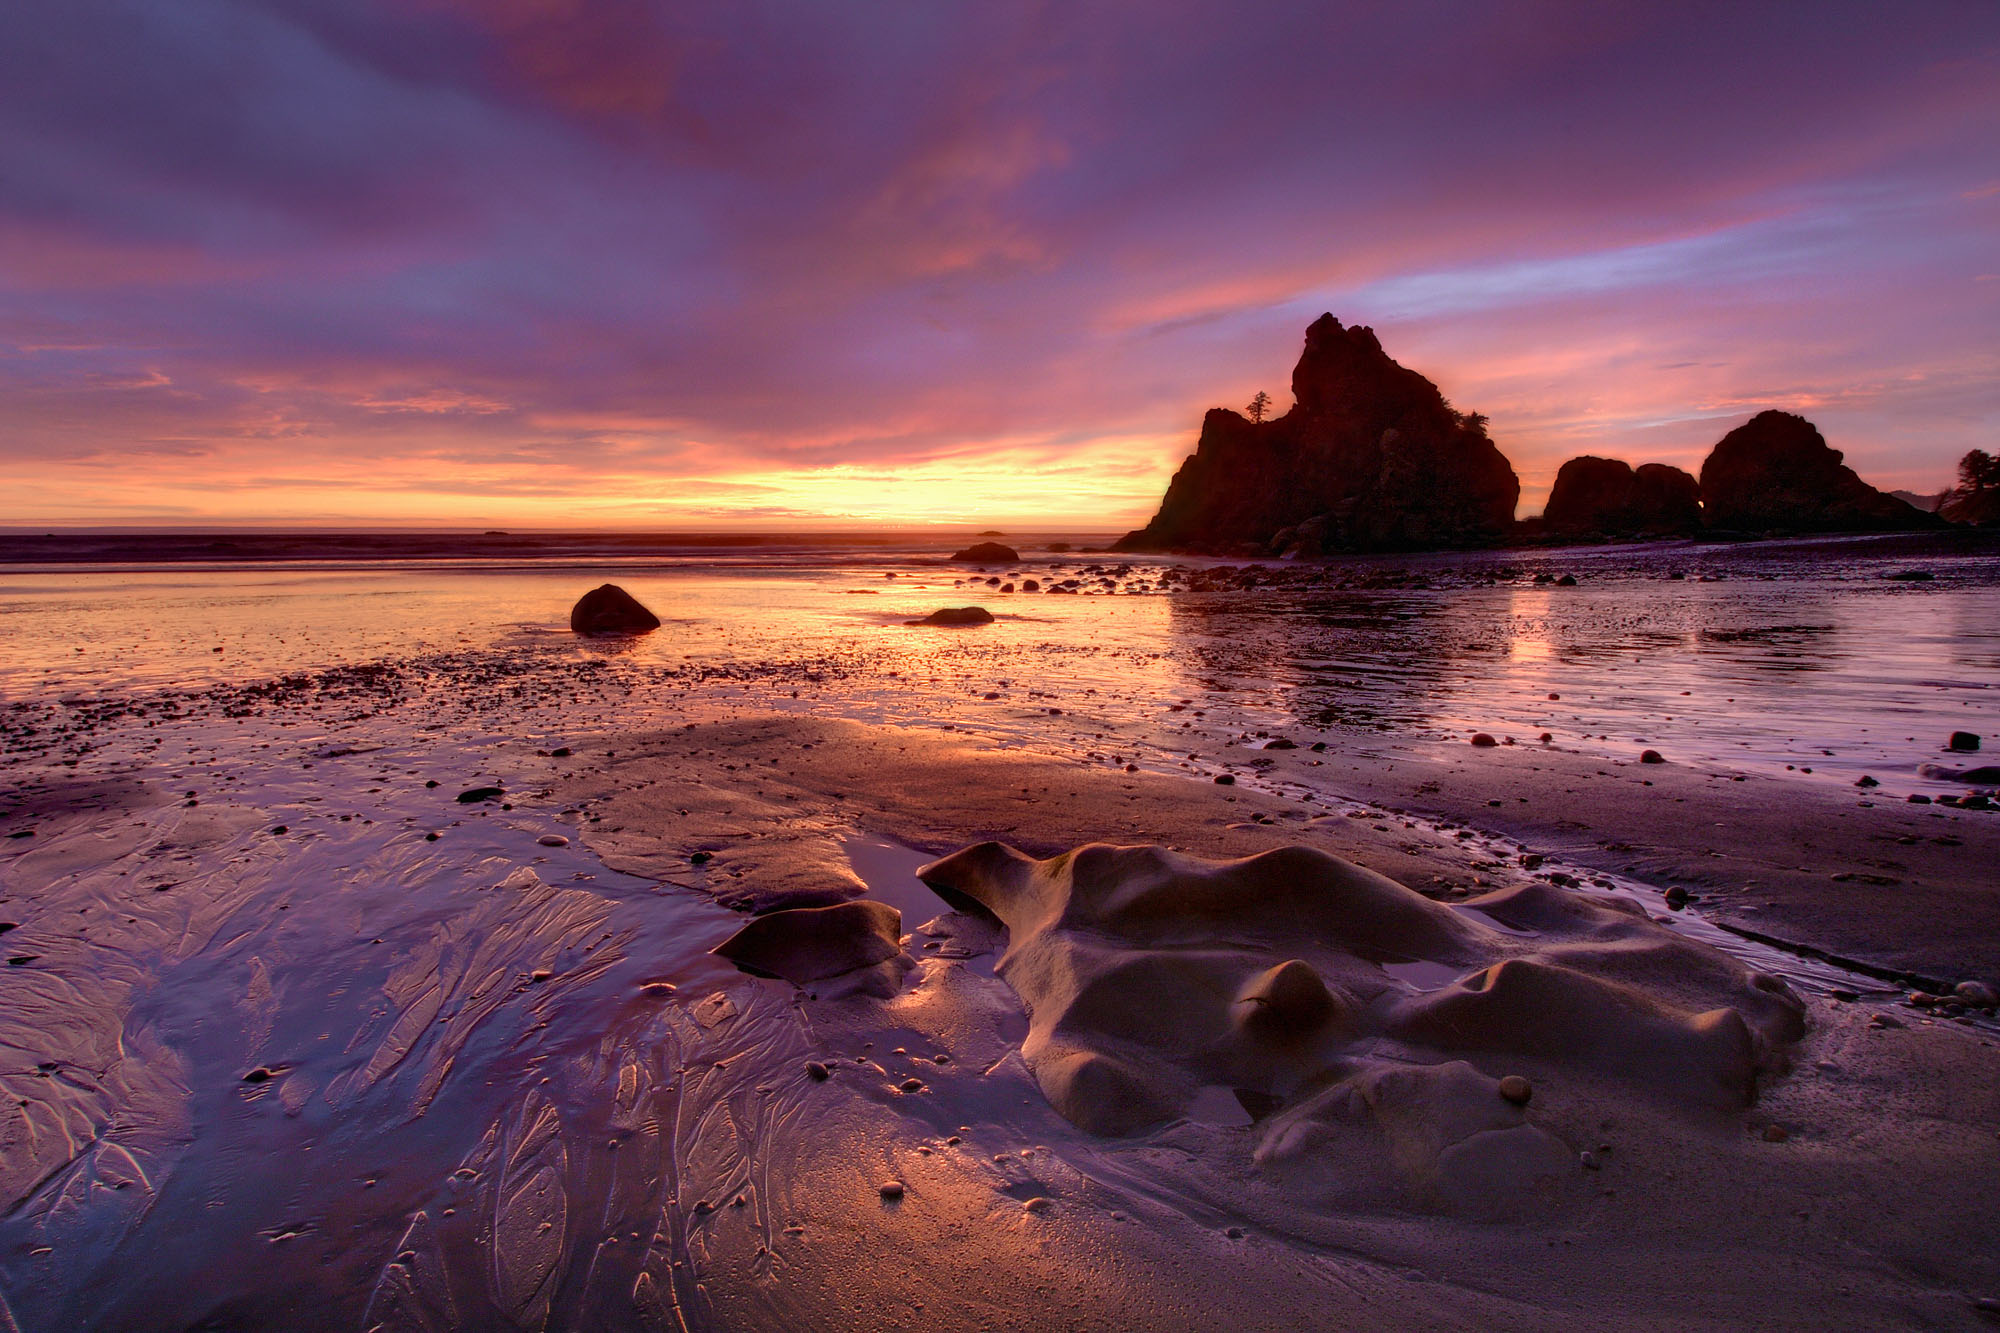 Sea stacks at Ruby Beach along the Pacific coastline of Olympic in Washington in the backlight of sunset